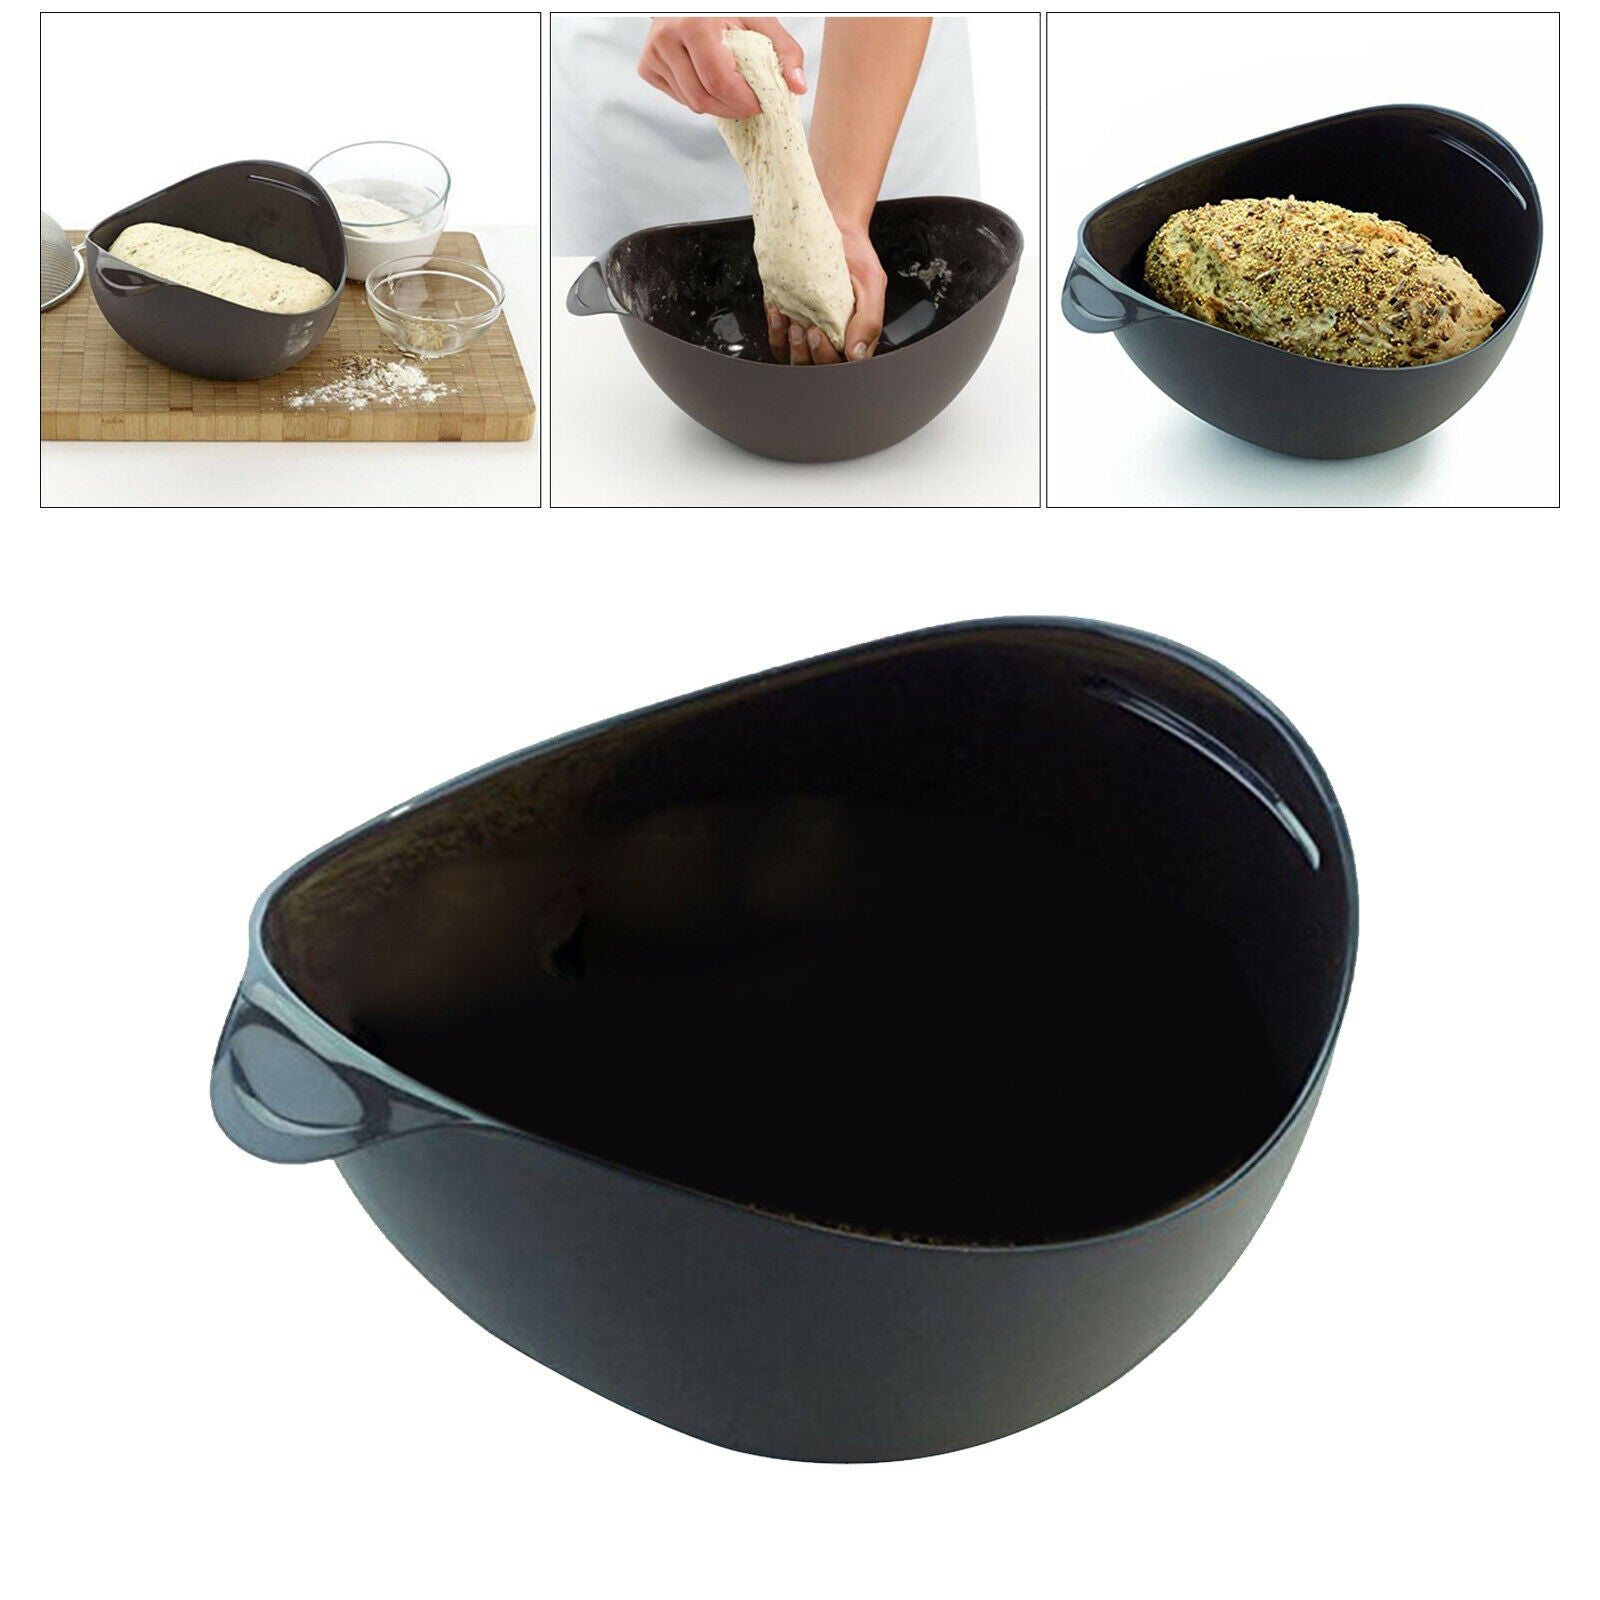 Silicone Bread Bowl Reusable Vegetable Fish Steam Food Cooking Kitchen Tool